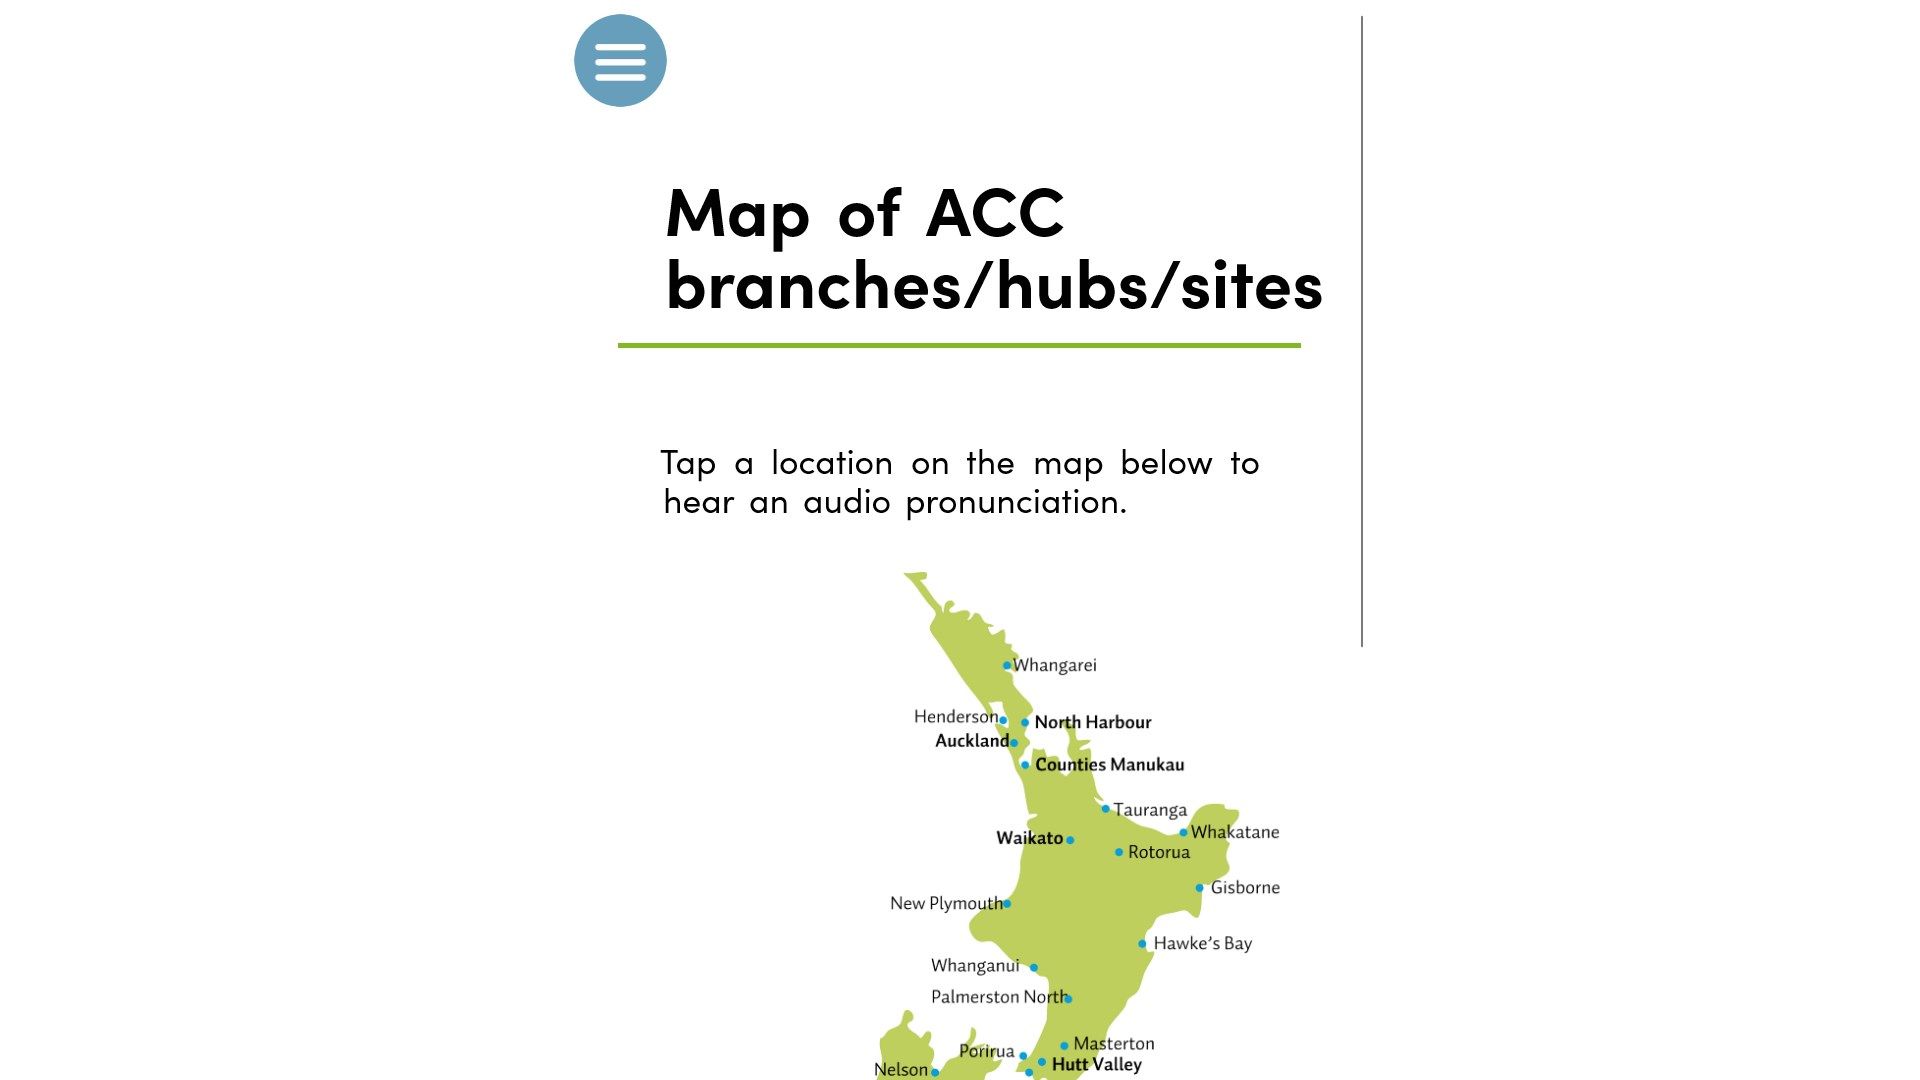 ACC branches